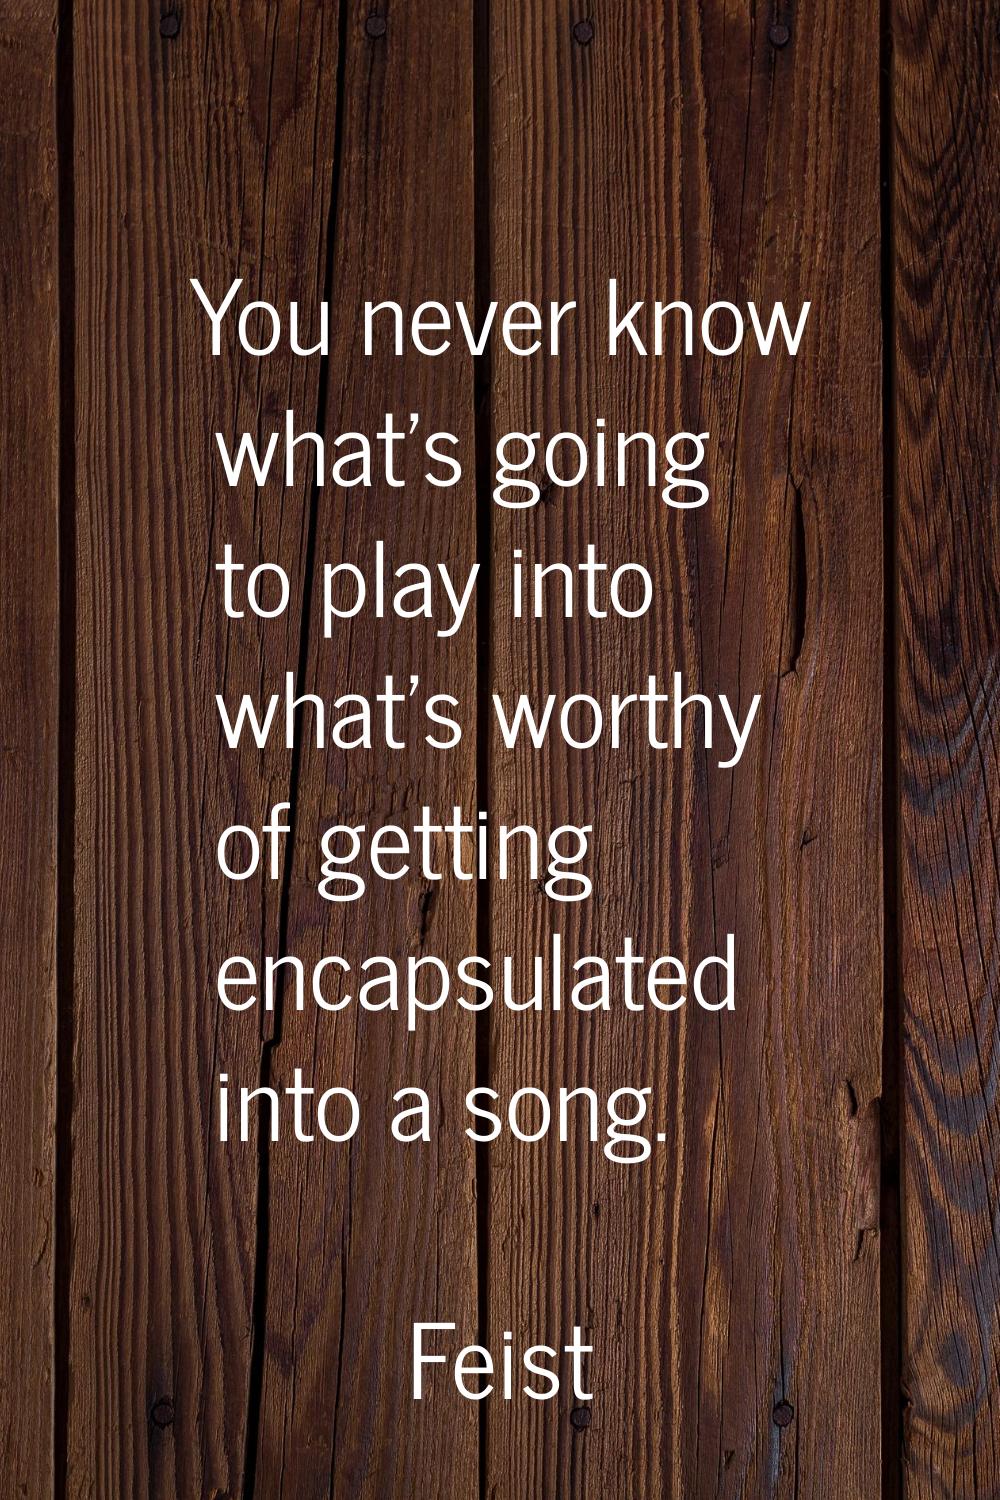 You never know what's going to play into what's worthy of getting encapsulated into a song.